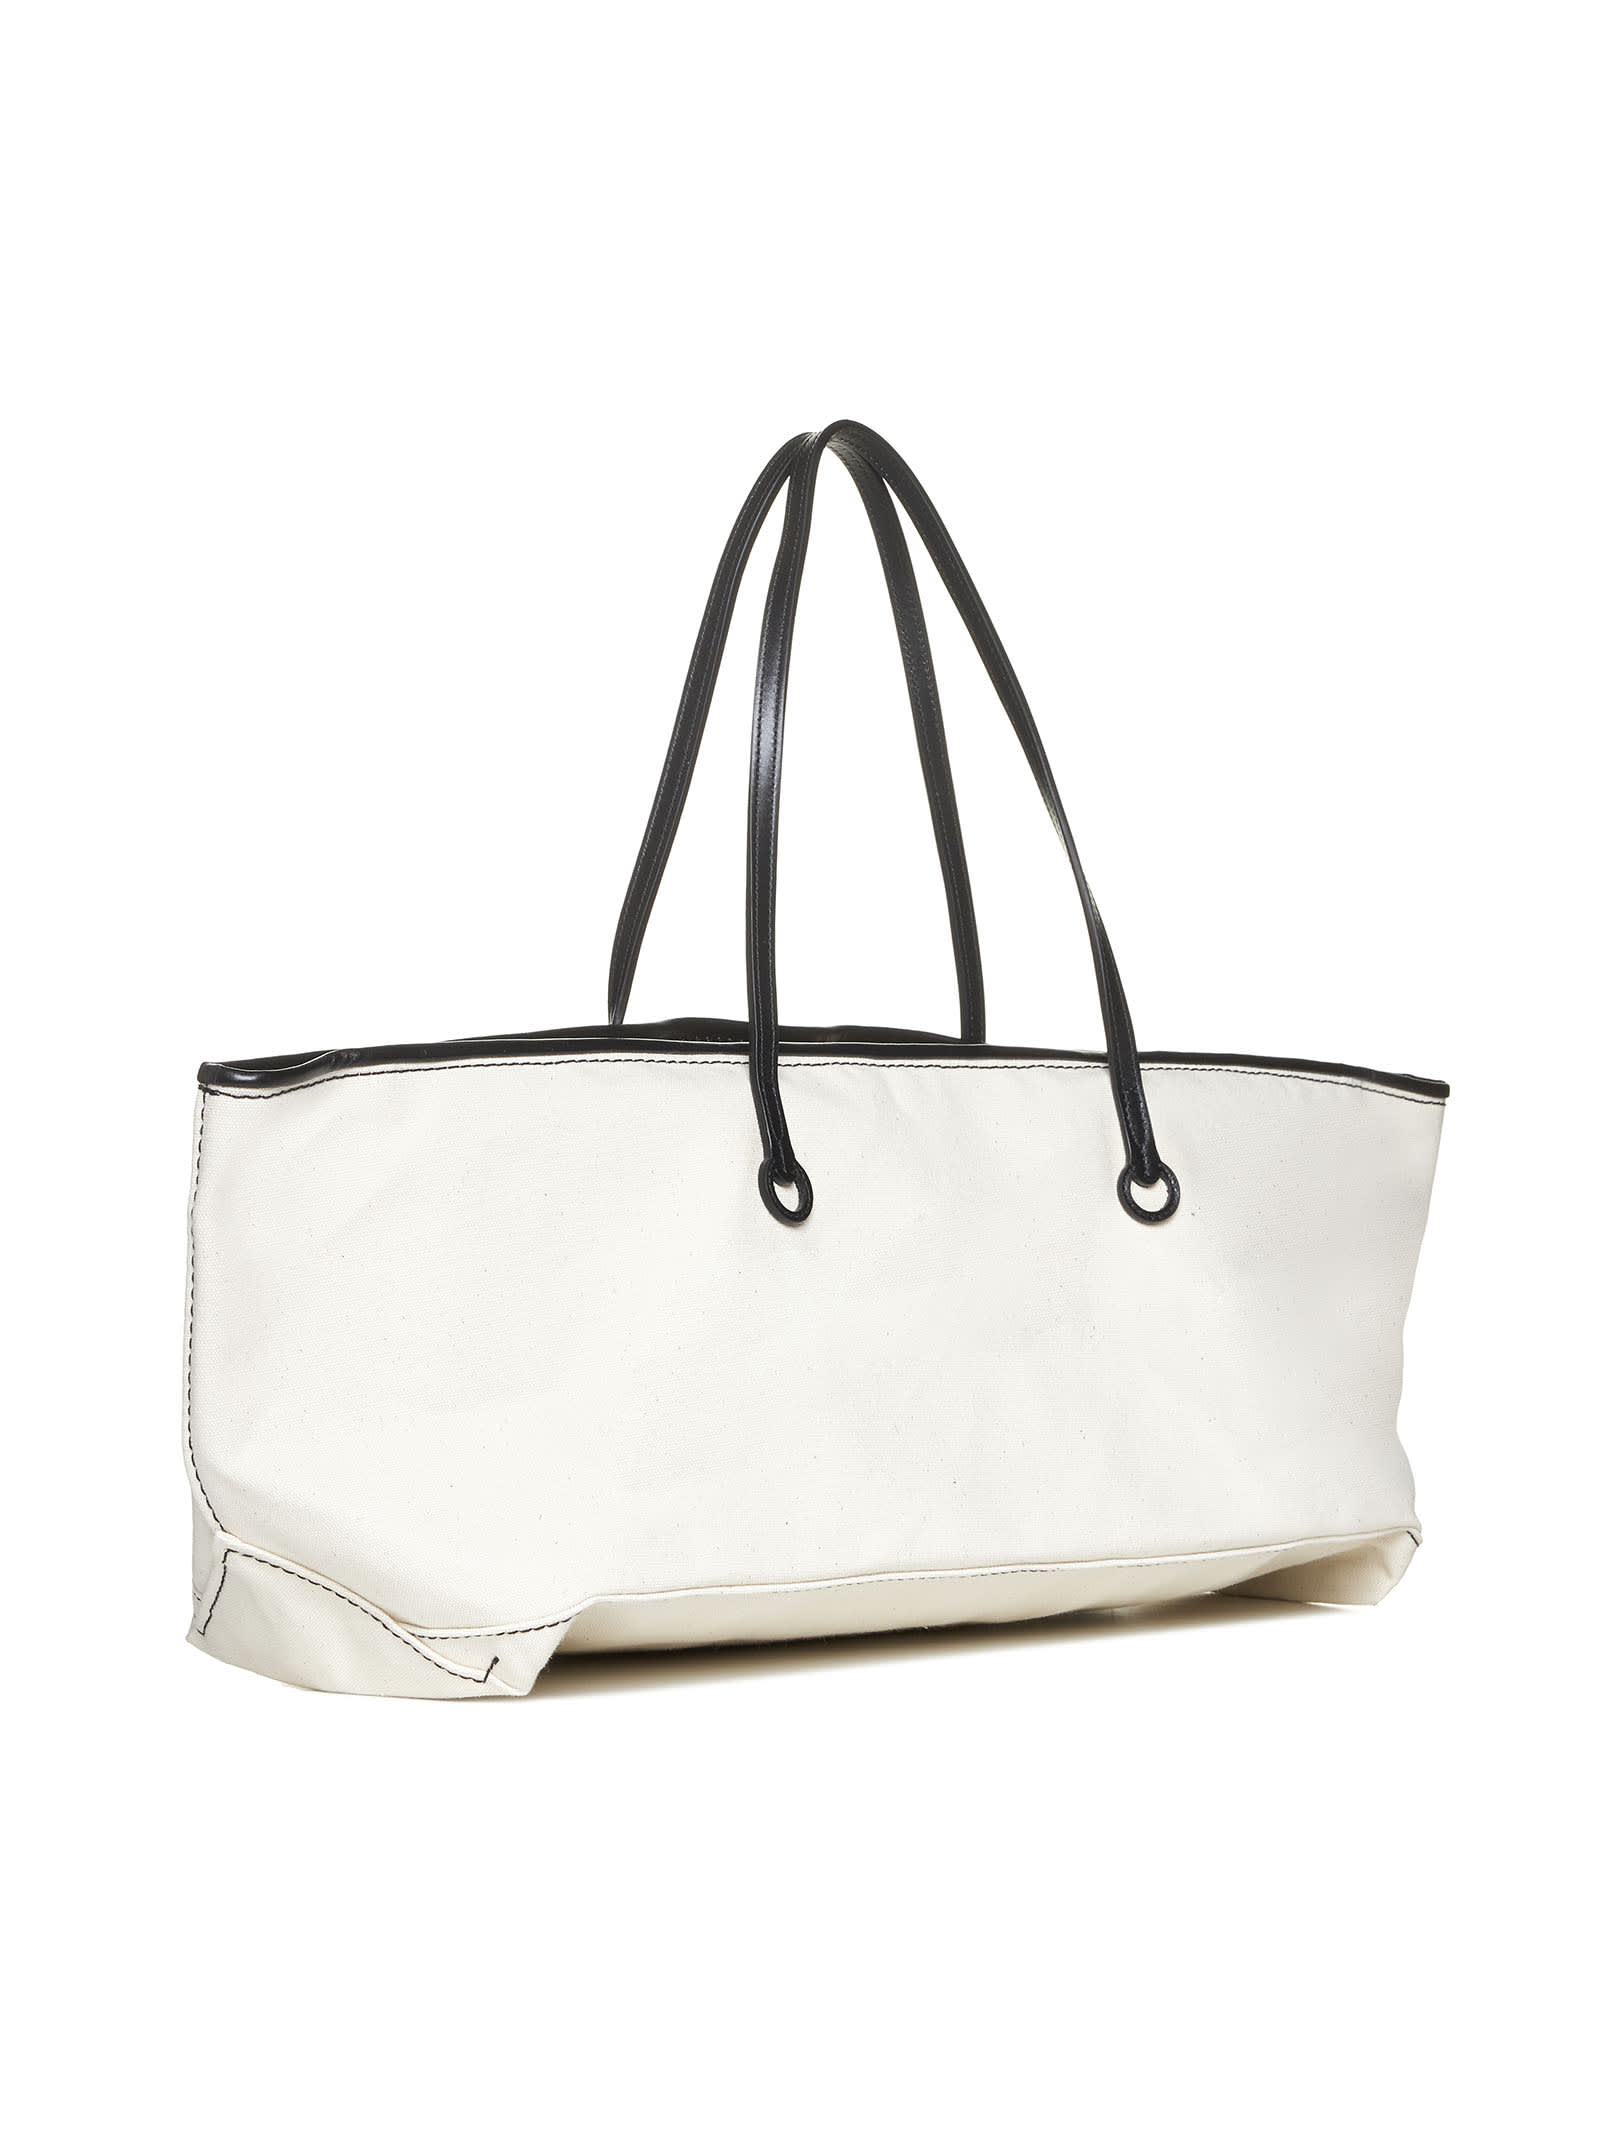 Shop Jw Anderson Tote In Natural/black